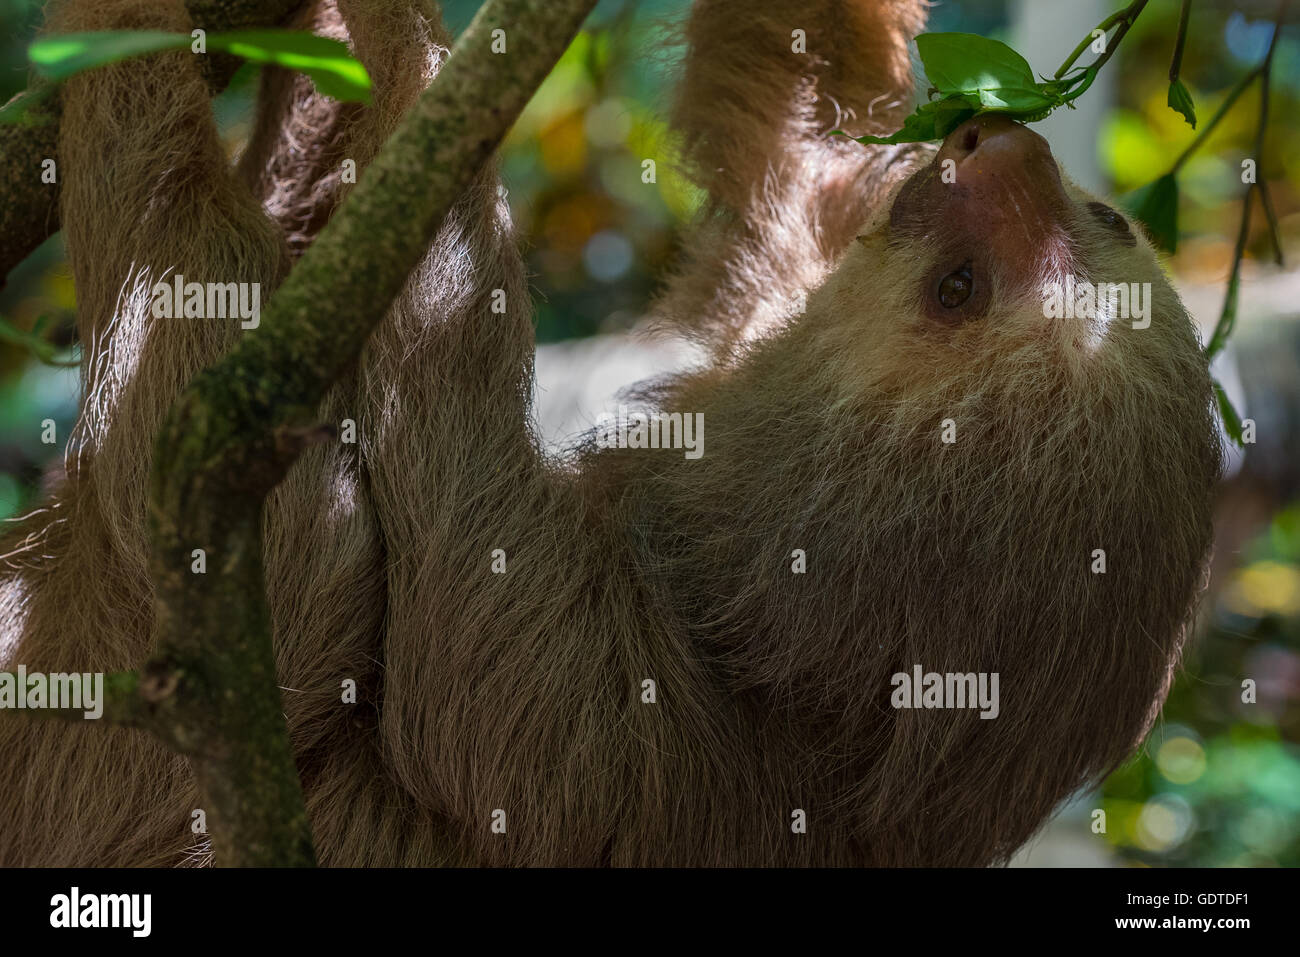 Young Two Toed Sloth hanging fro a tree branch Stock Photo